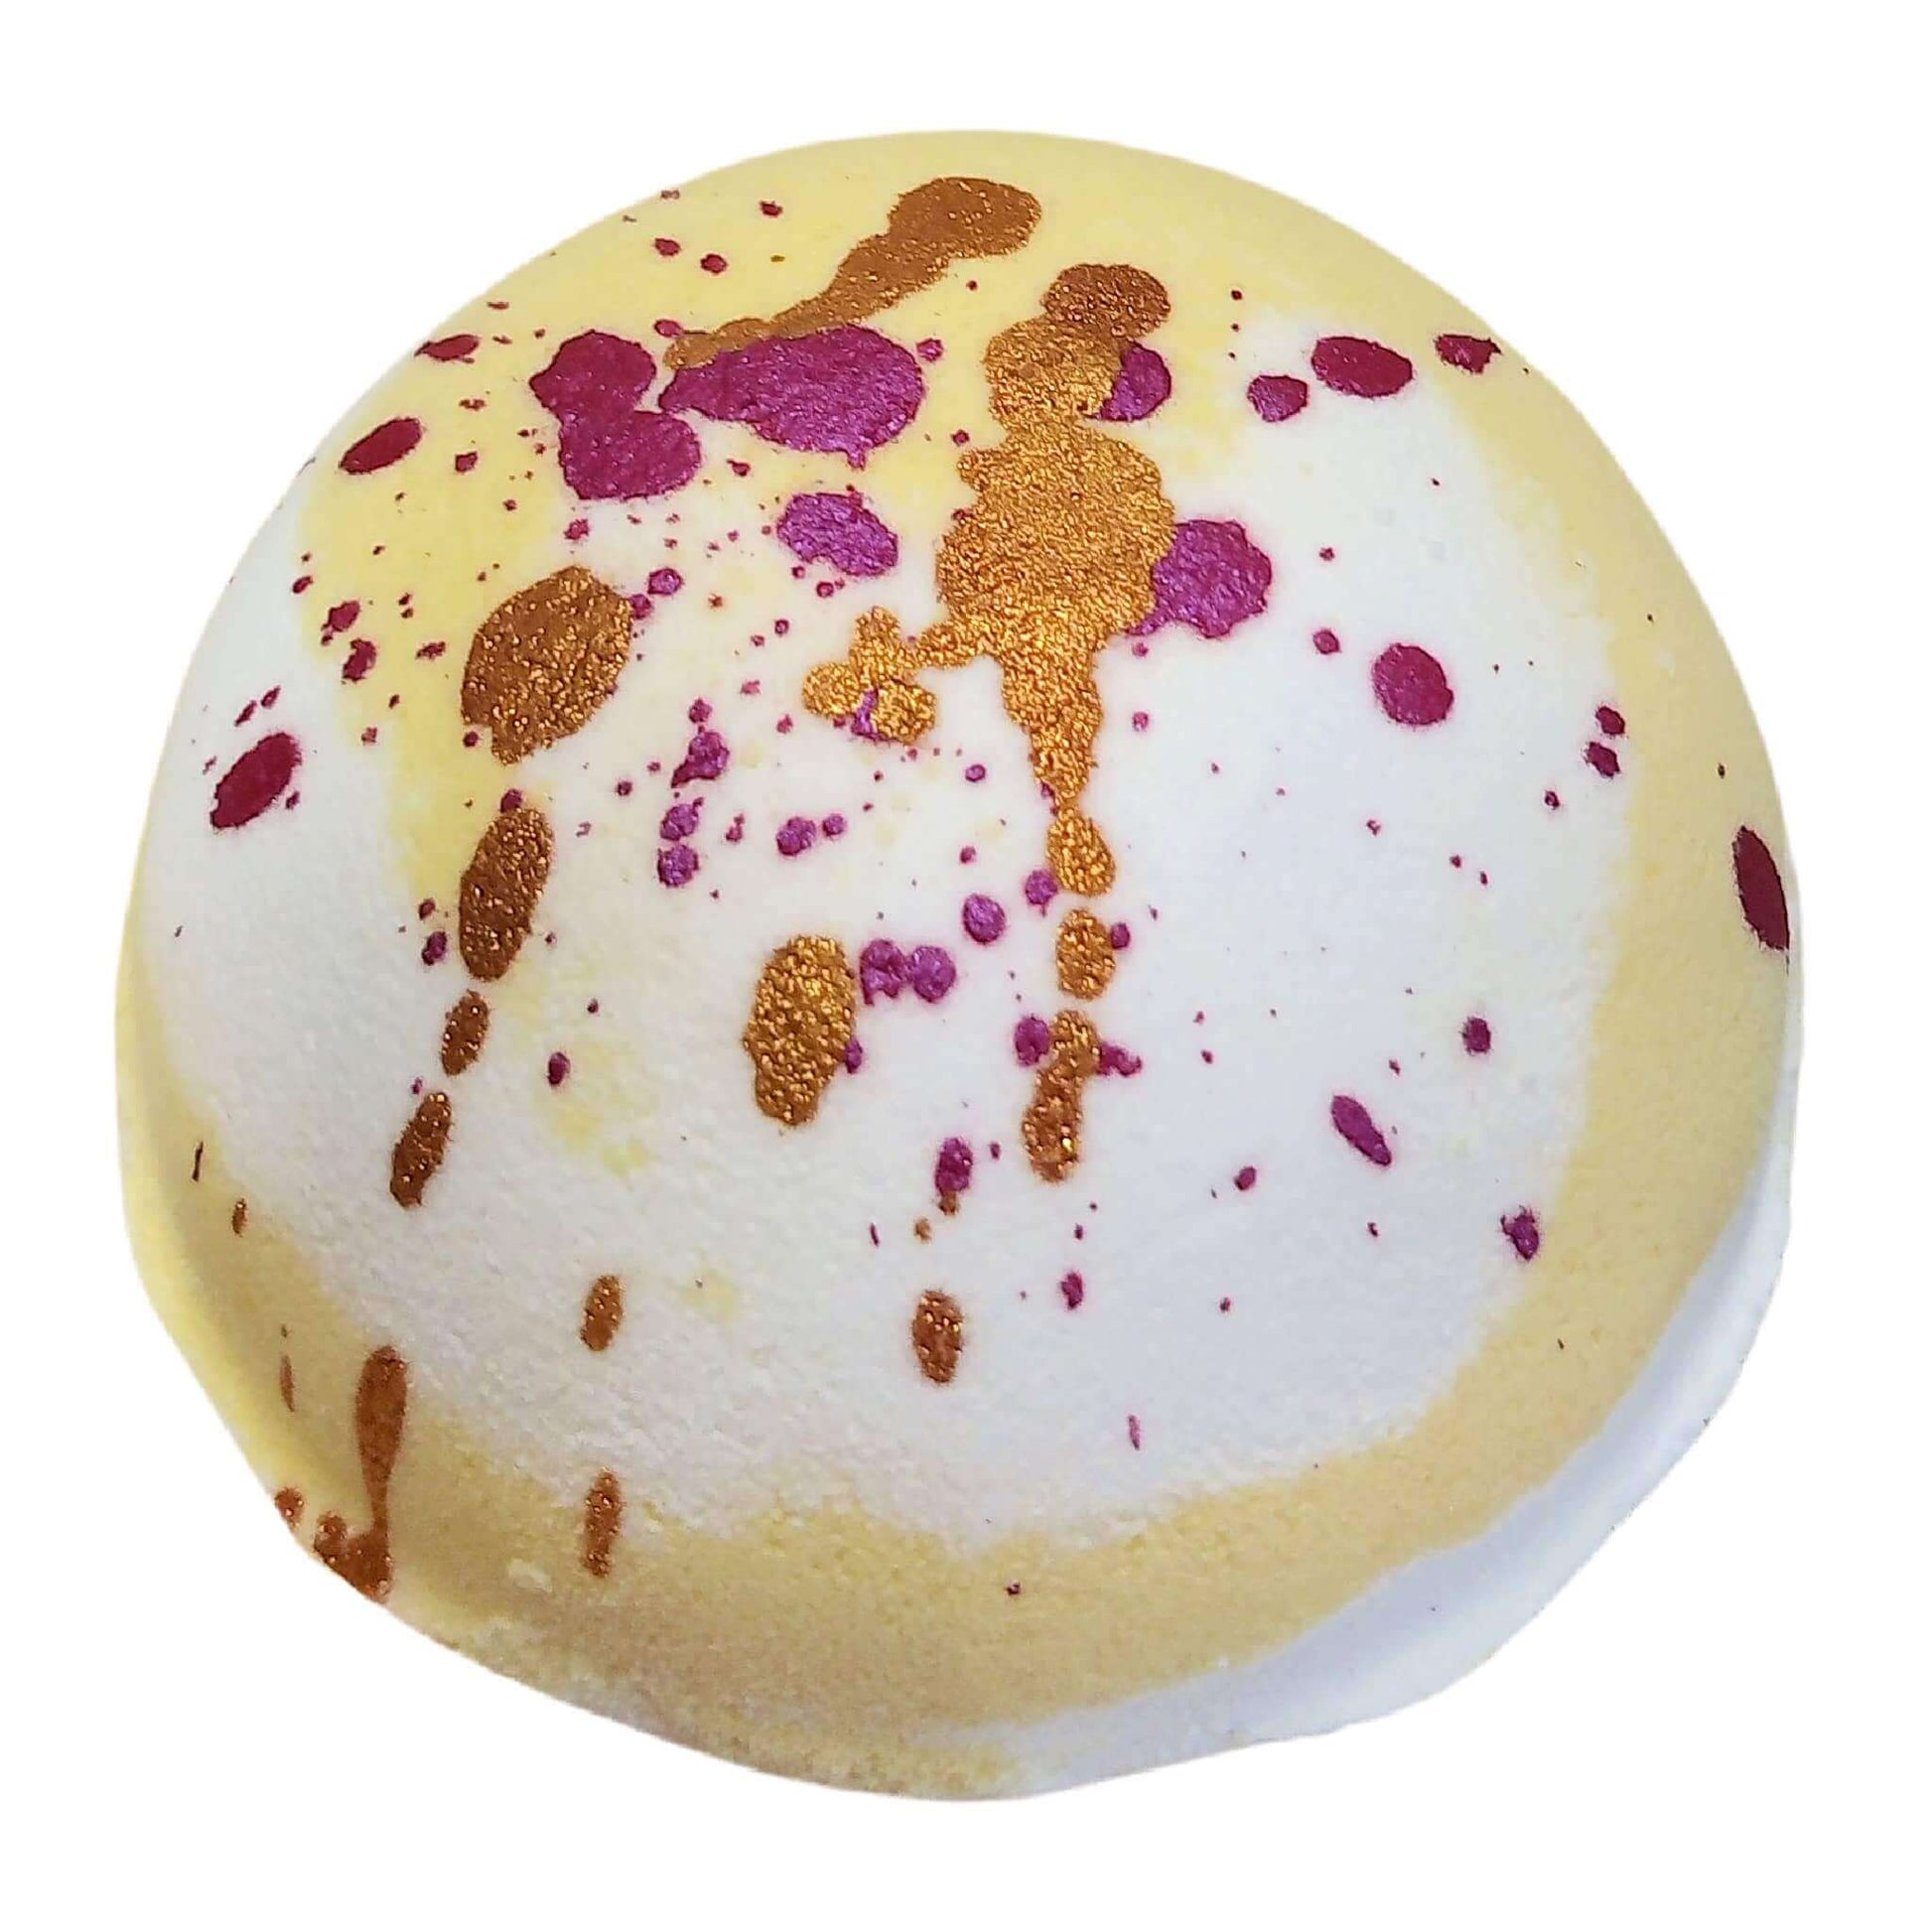 Dive into a sensory delight with our Cherry Lemonade Fizzy Bath Bomb. Unwind in luxurious bliss!